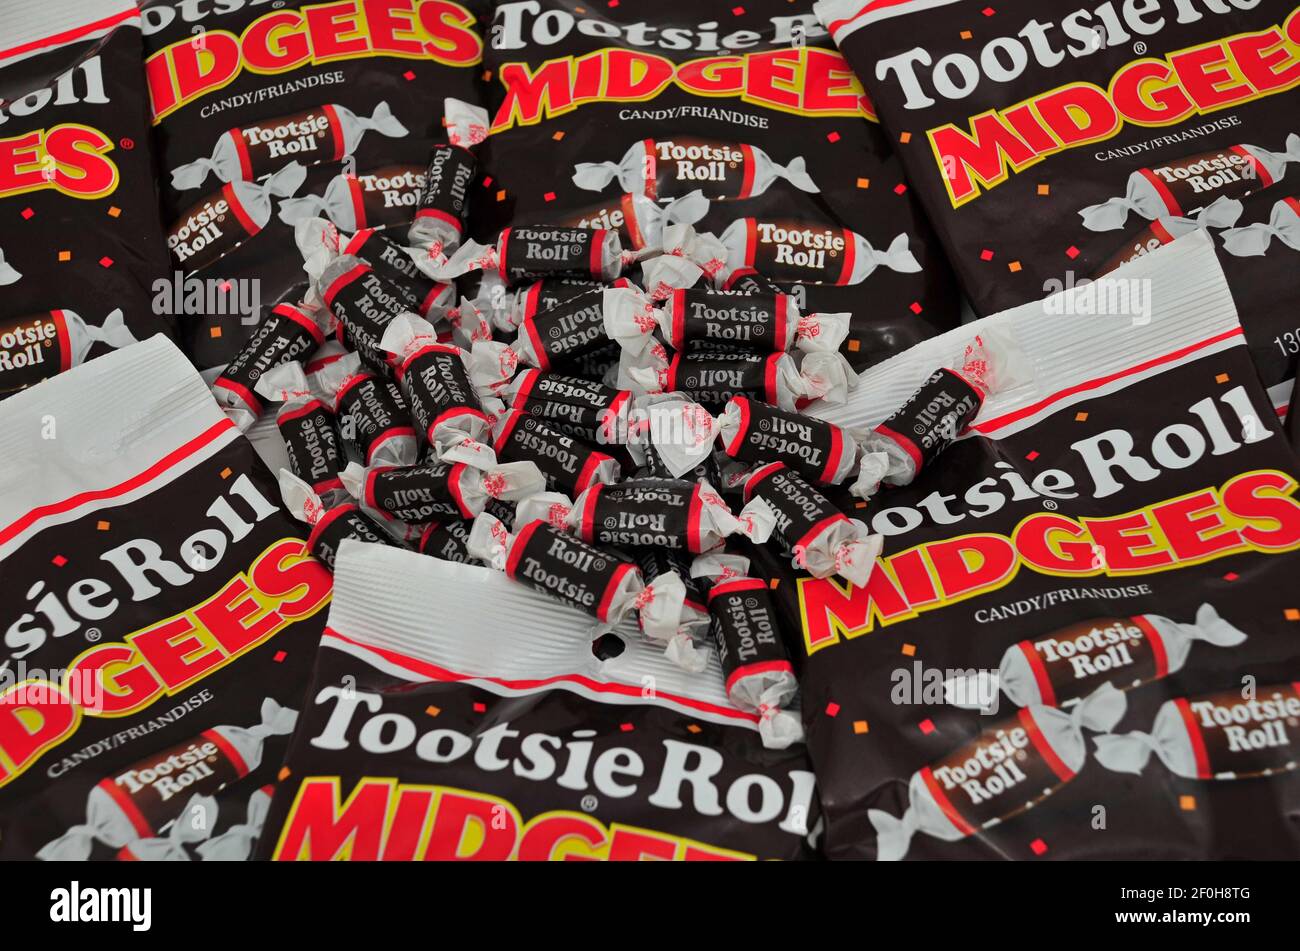 15 March 2010 - Surrey, B.C., Canada - Packages of Tootsie Roll Midgees and individual candies are seen in this posed photograph. Tootsie Roll is expected to announce earnings on Wednesday, March 17, 2010. Photo Credit: Adrian Brown / Sipa Press./1003161526 Stock Photo